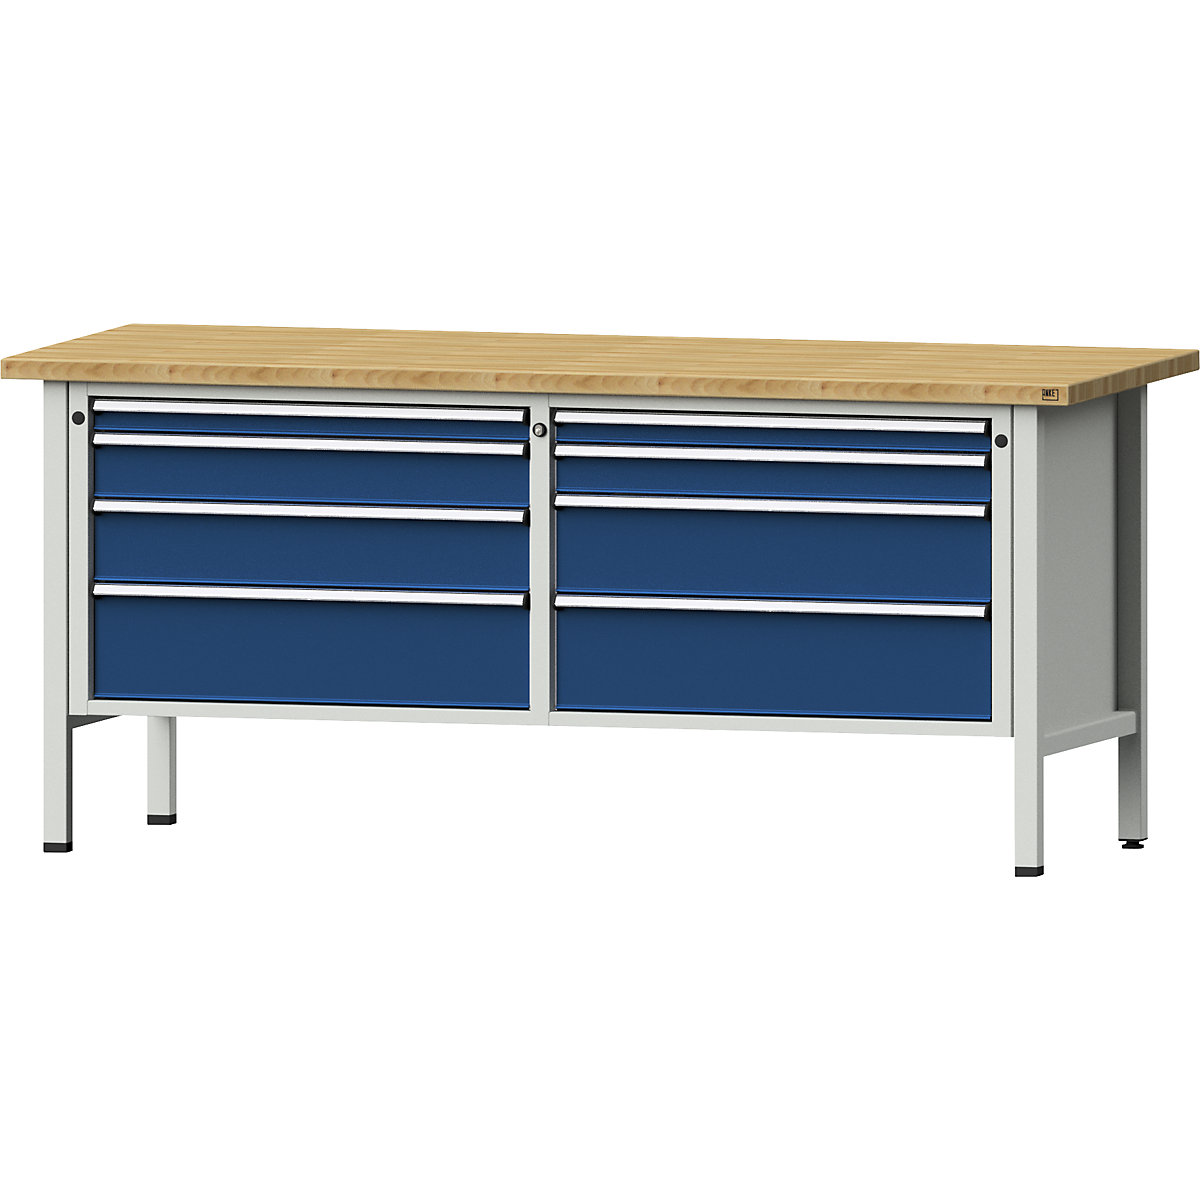 Workbenches 2000 mm wide, frame construction – ANKE, 8 drawers, solid beech worktop, height 890 mm-7